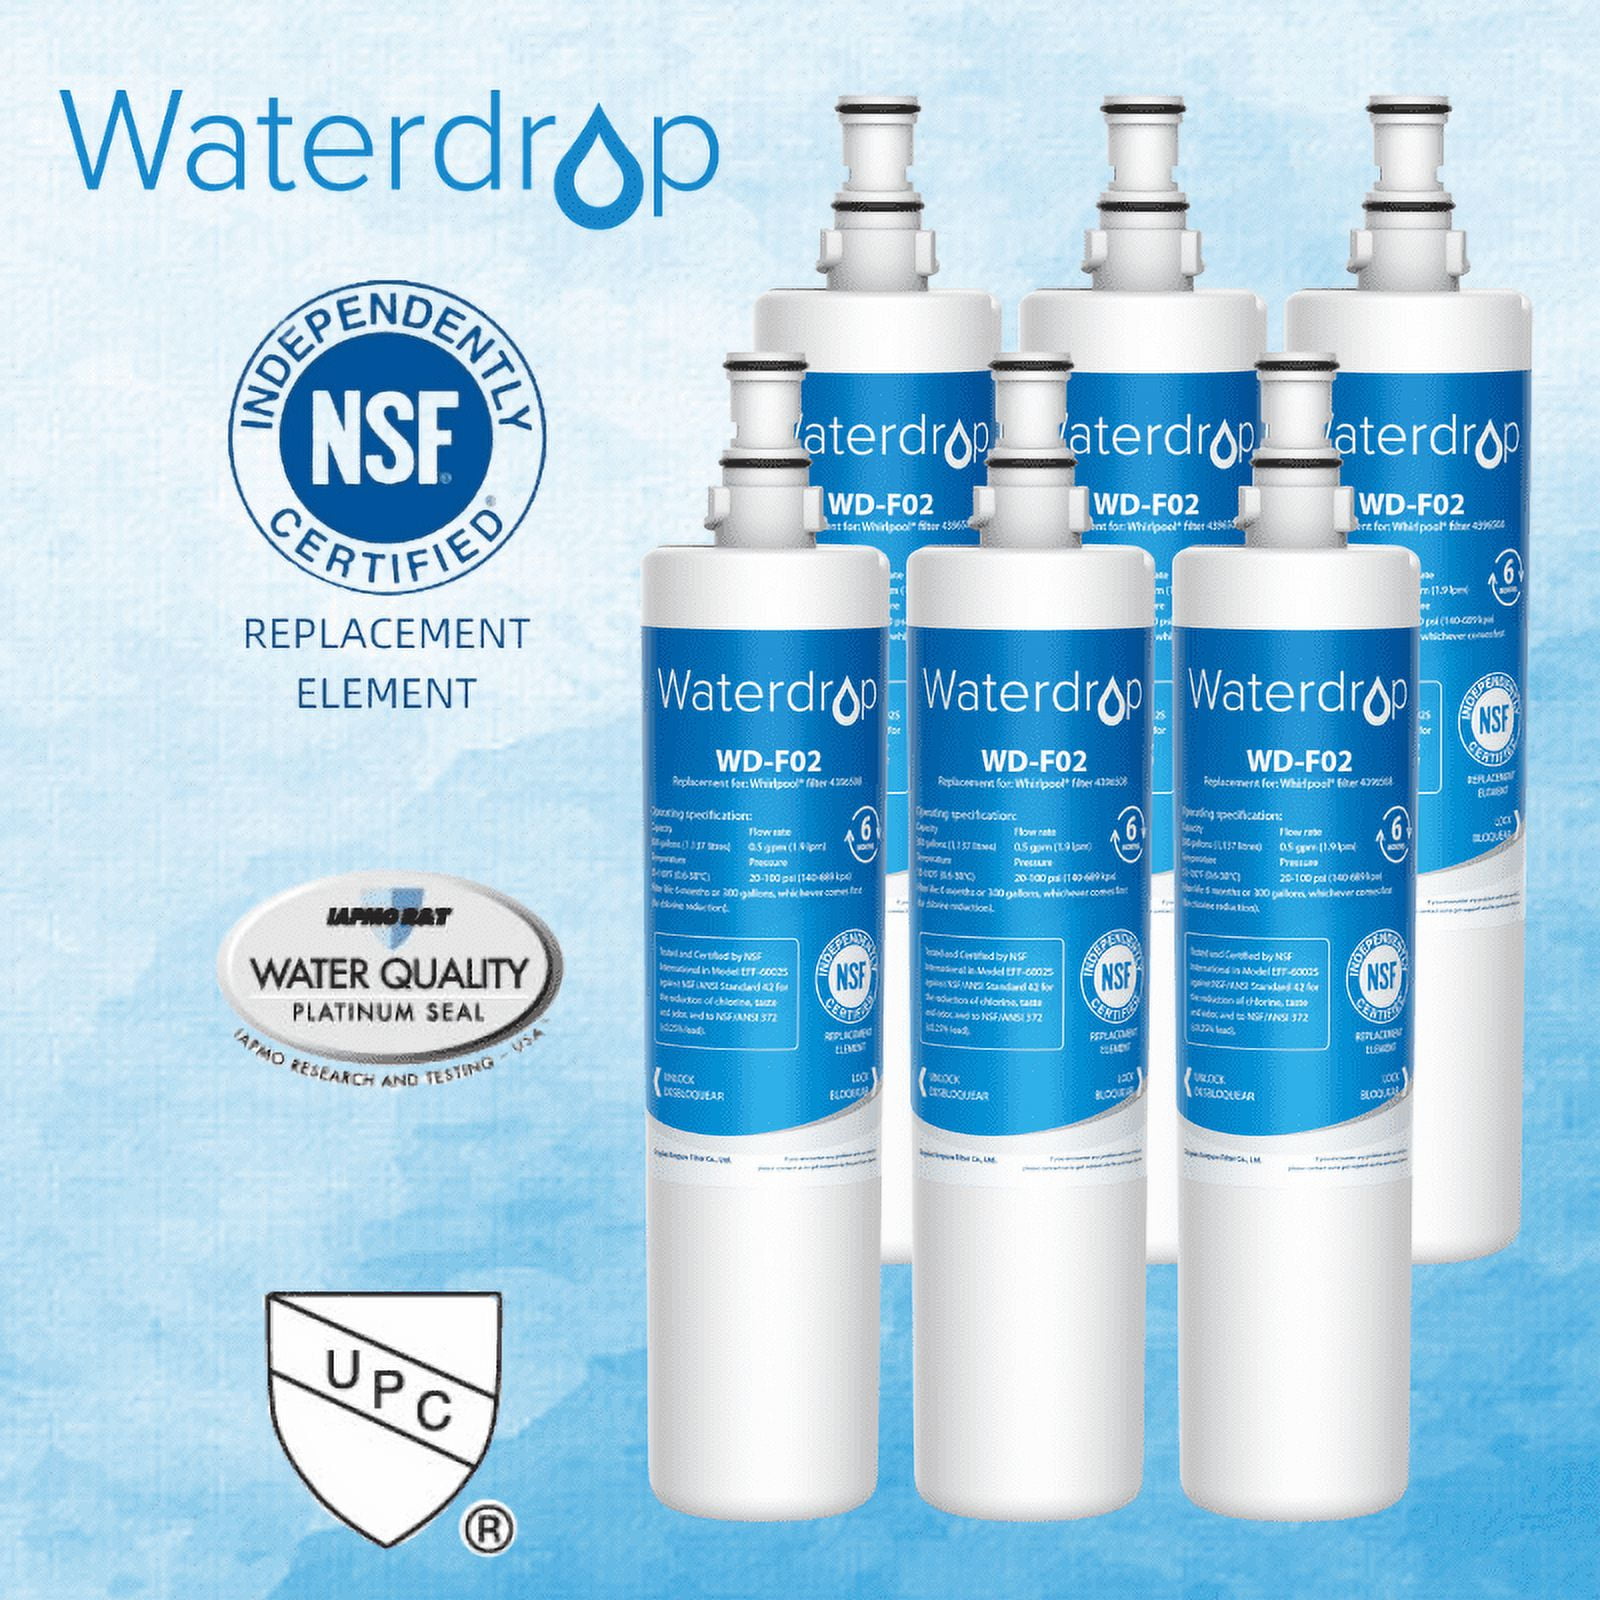 Refresh Replacement Water Filter for KitchenAid Krfc302ess Refrigerator Water Filter (4 Pack)